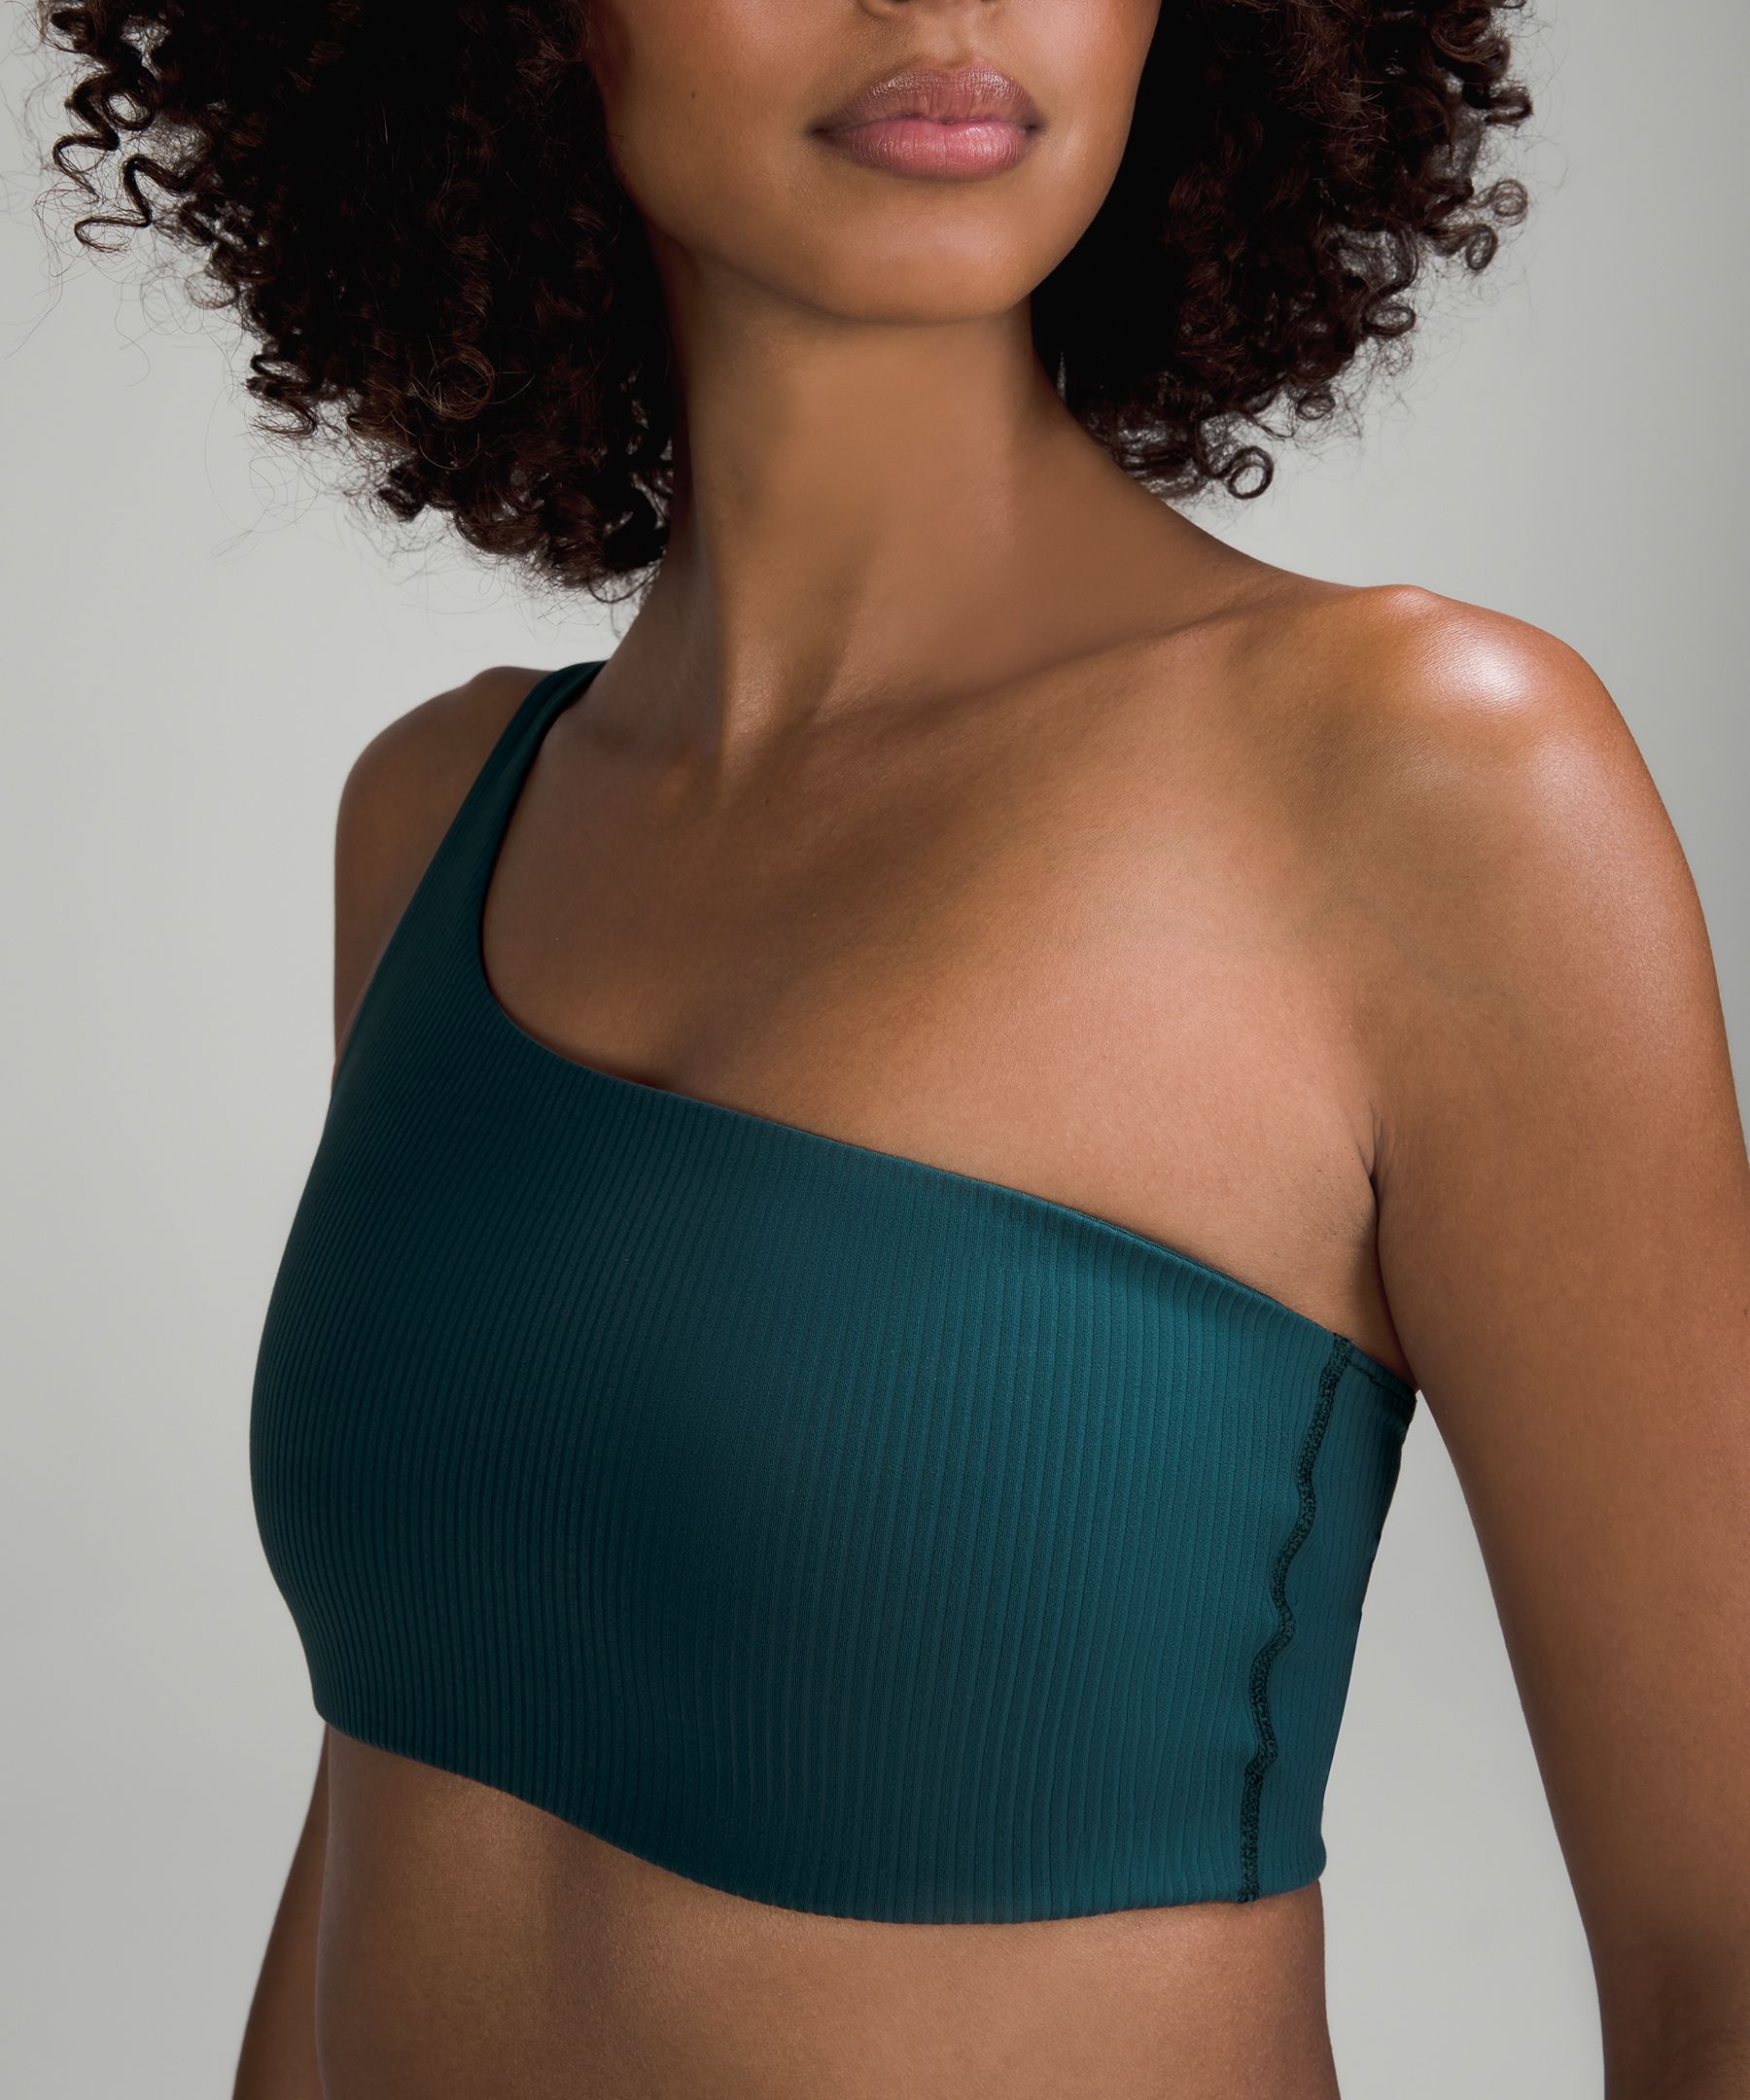 This @lululemon Ribbed Nulu Asymmetrical Yoga Bra is a MUST have